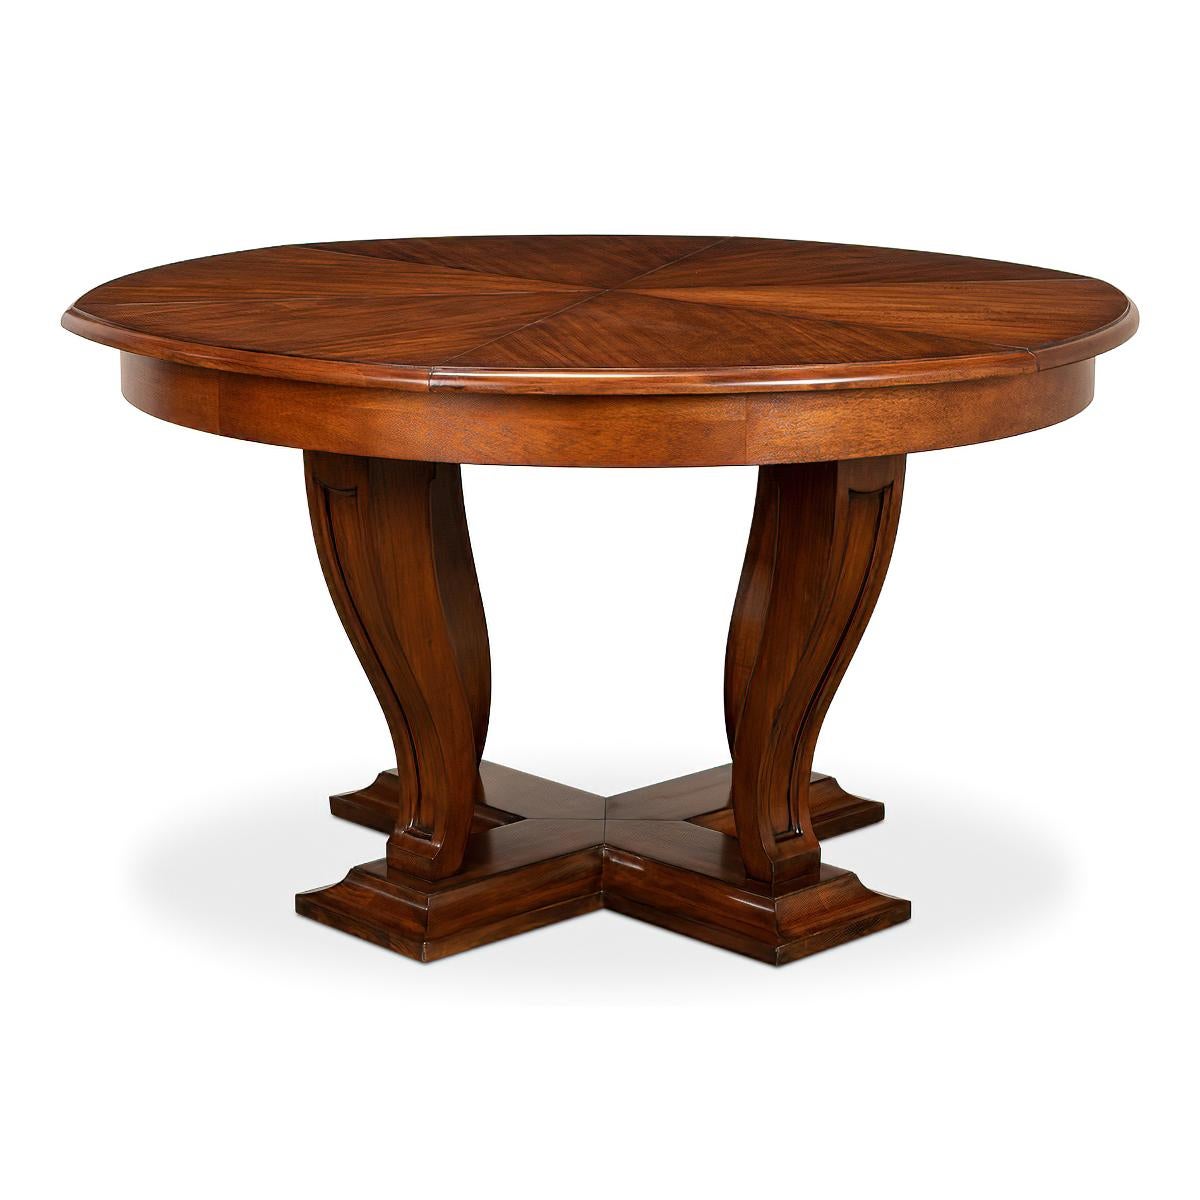 Asian Art Deco Style Walnut Round Dining Table For Sale